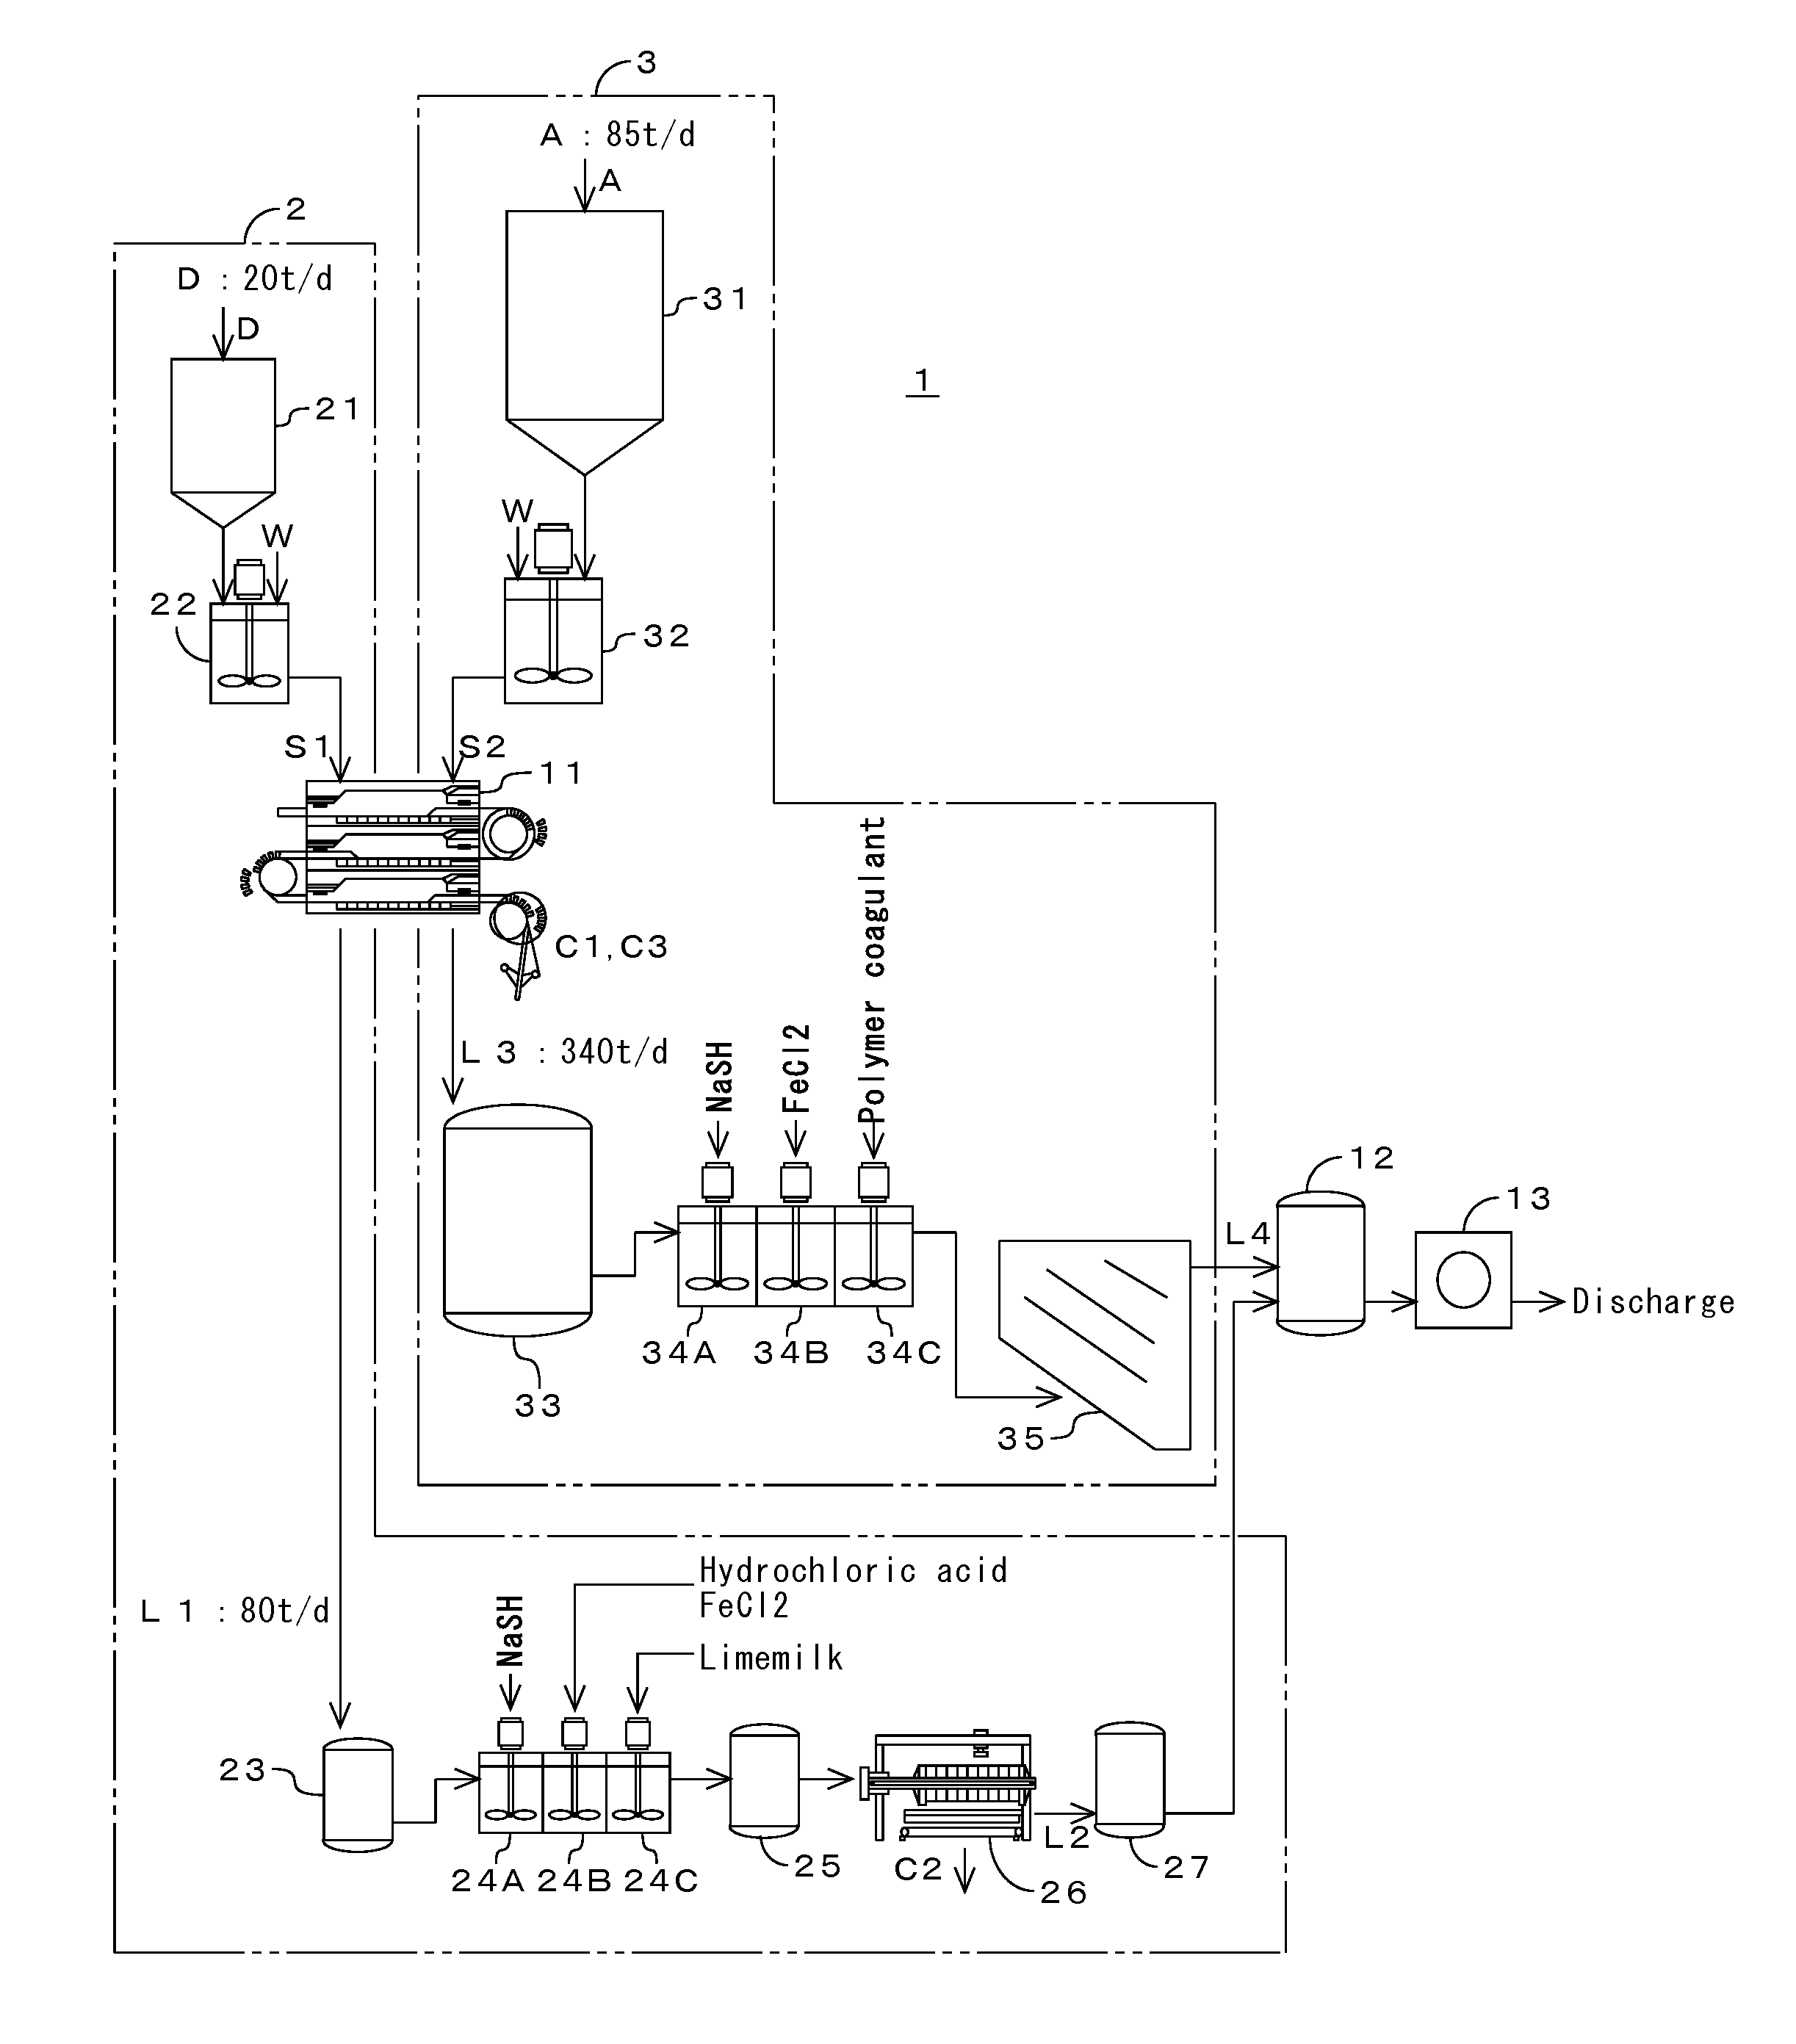 Method for washing incineration ash and dust contained in extracted cement kiln combustion gas